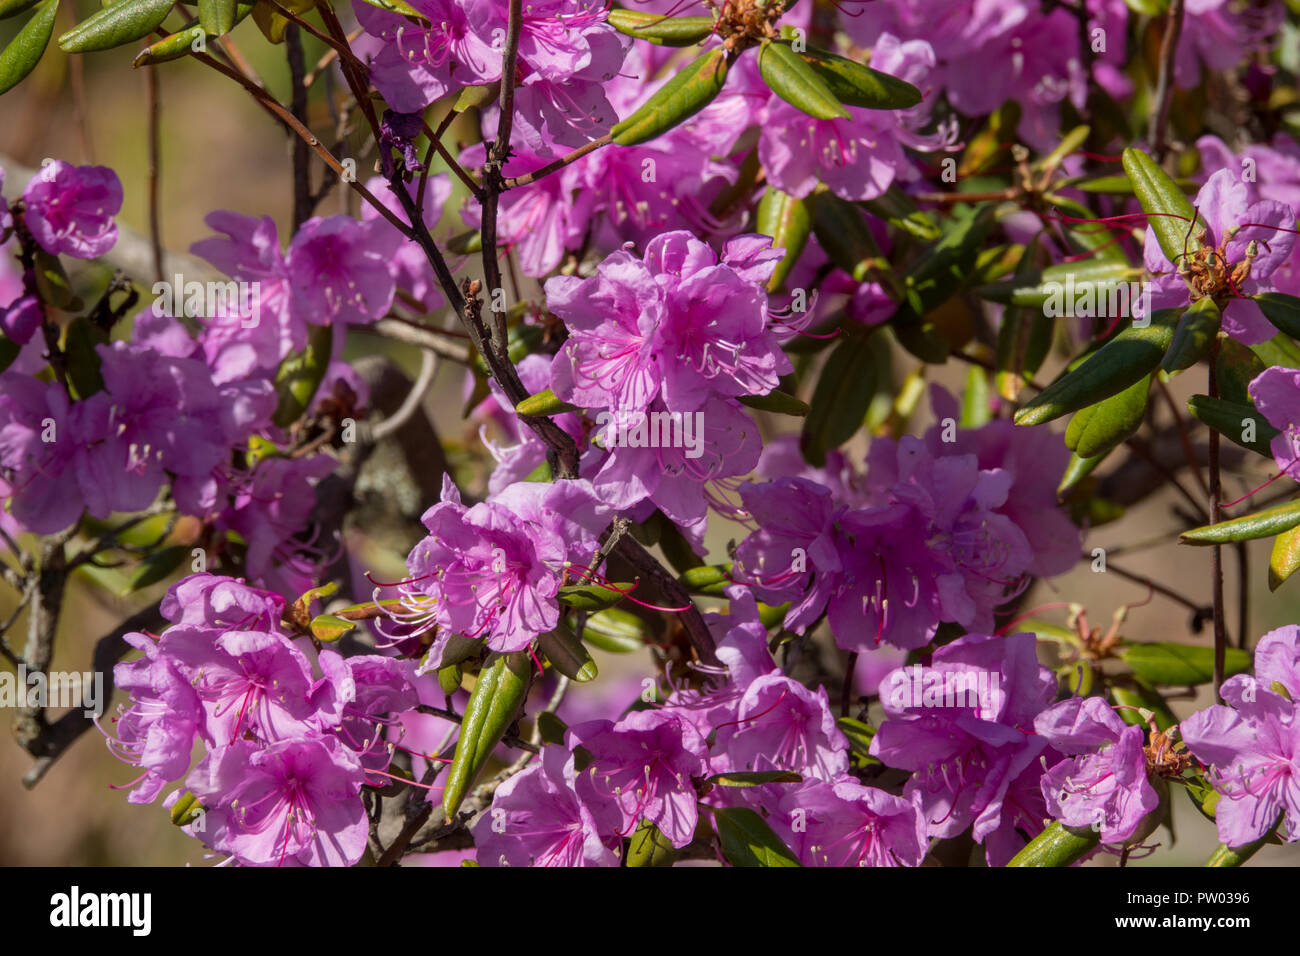 Lilac flowering rhododendron bush Stock Photo